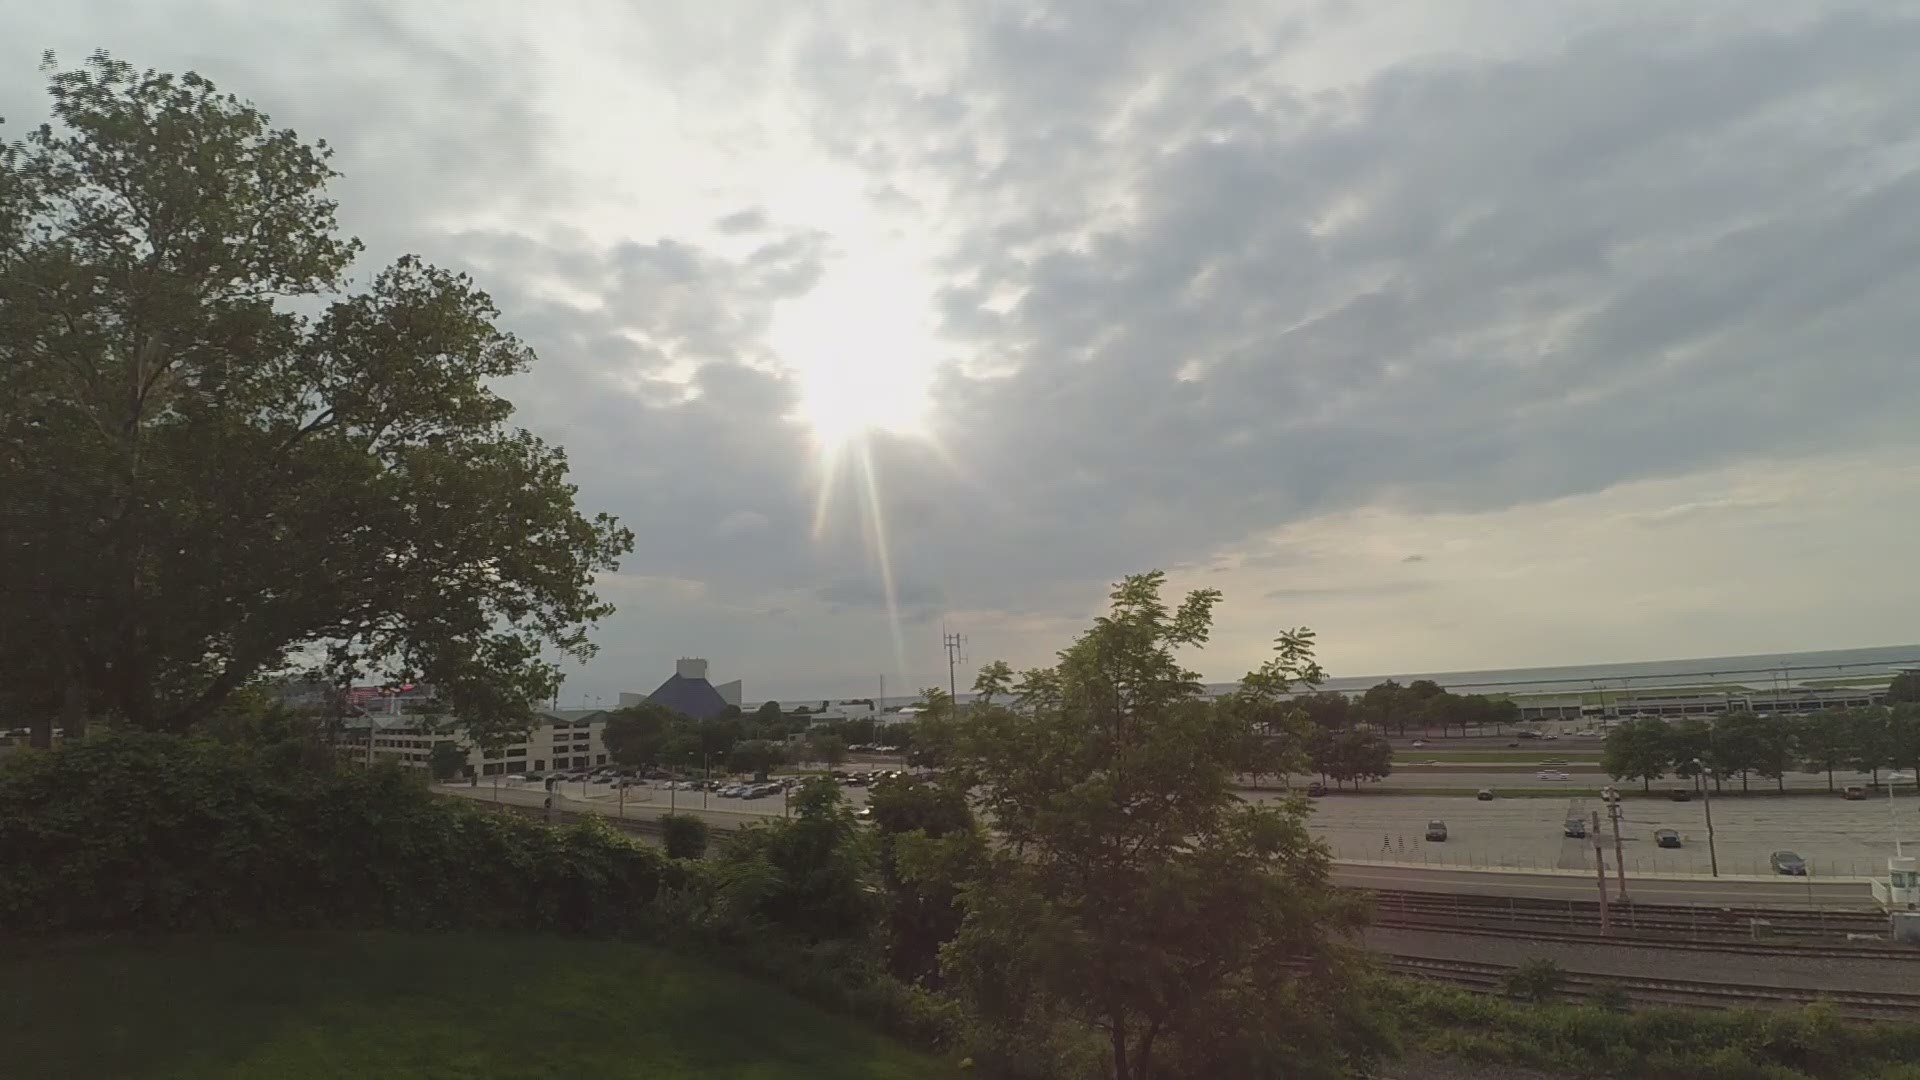 Check out our Tuesday evening time lapse... Surface winds are out of the east, southeast here in downtown Cleveland - though clouds above are moving generally west to east. #3weather